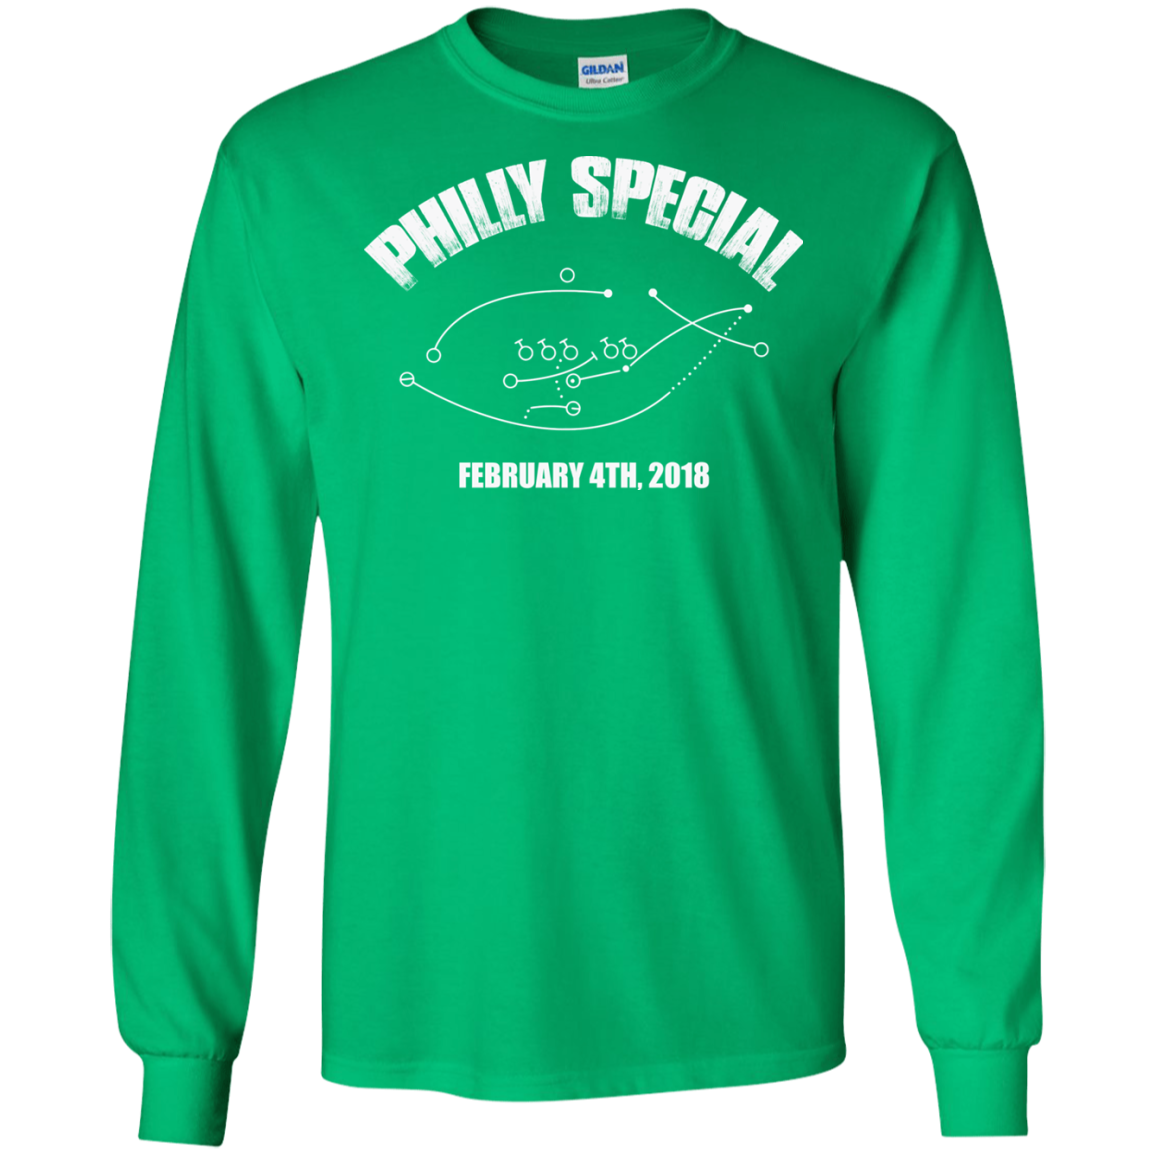 philly philly shirt